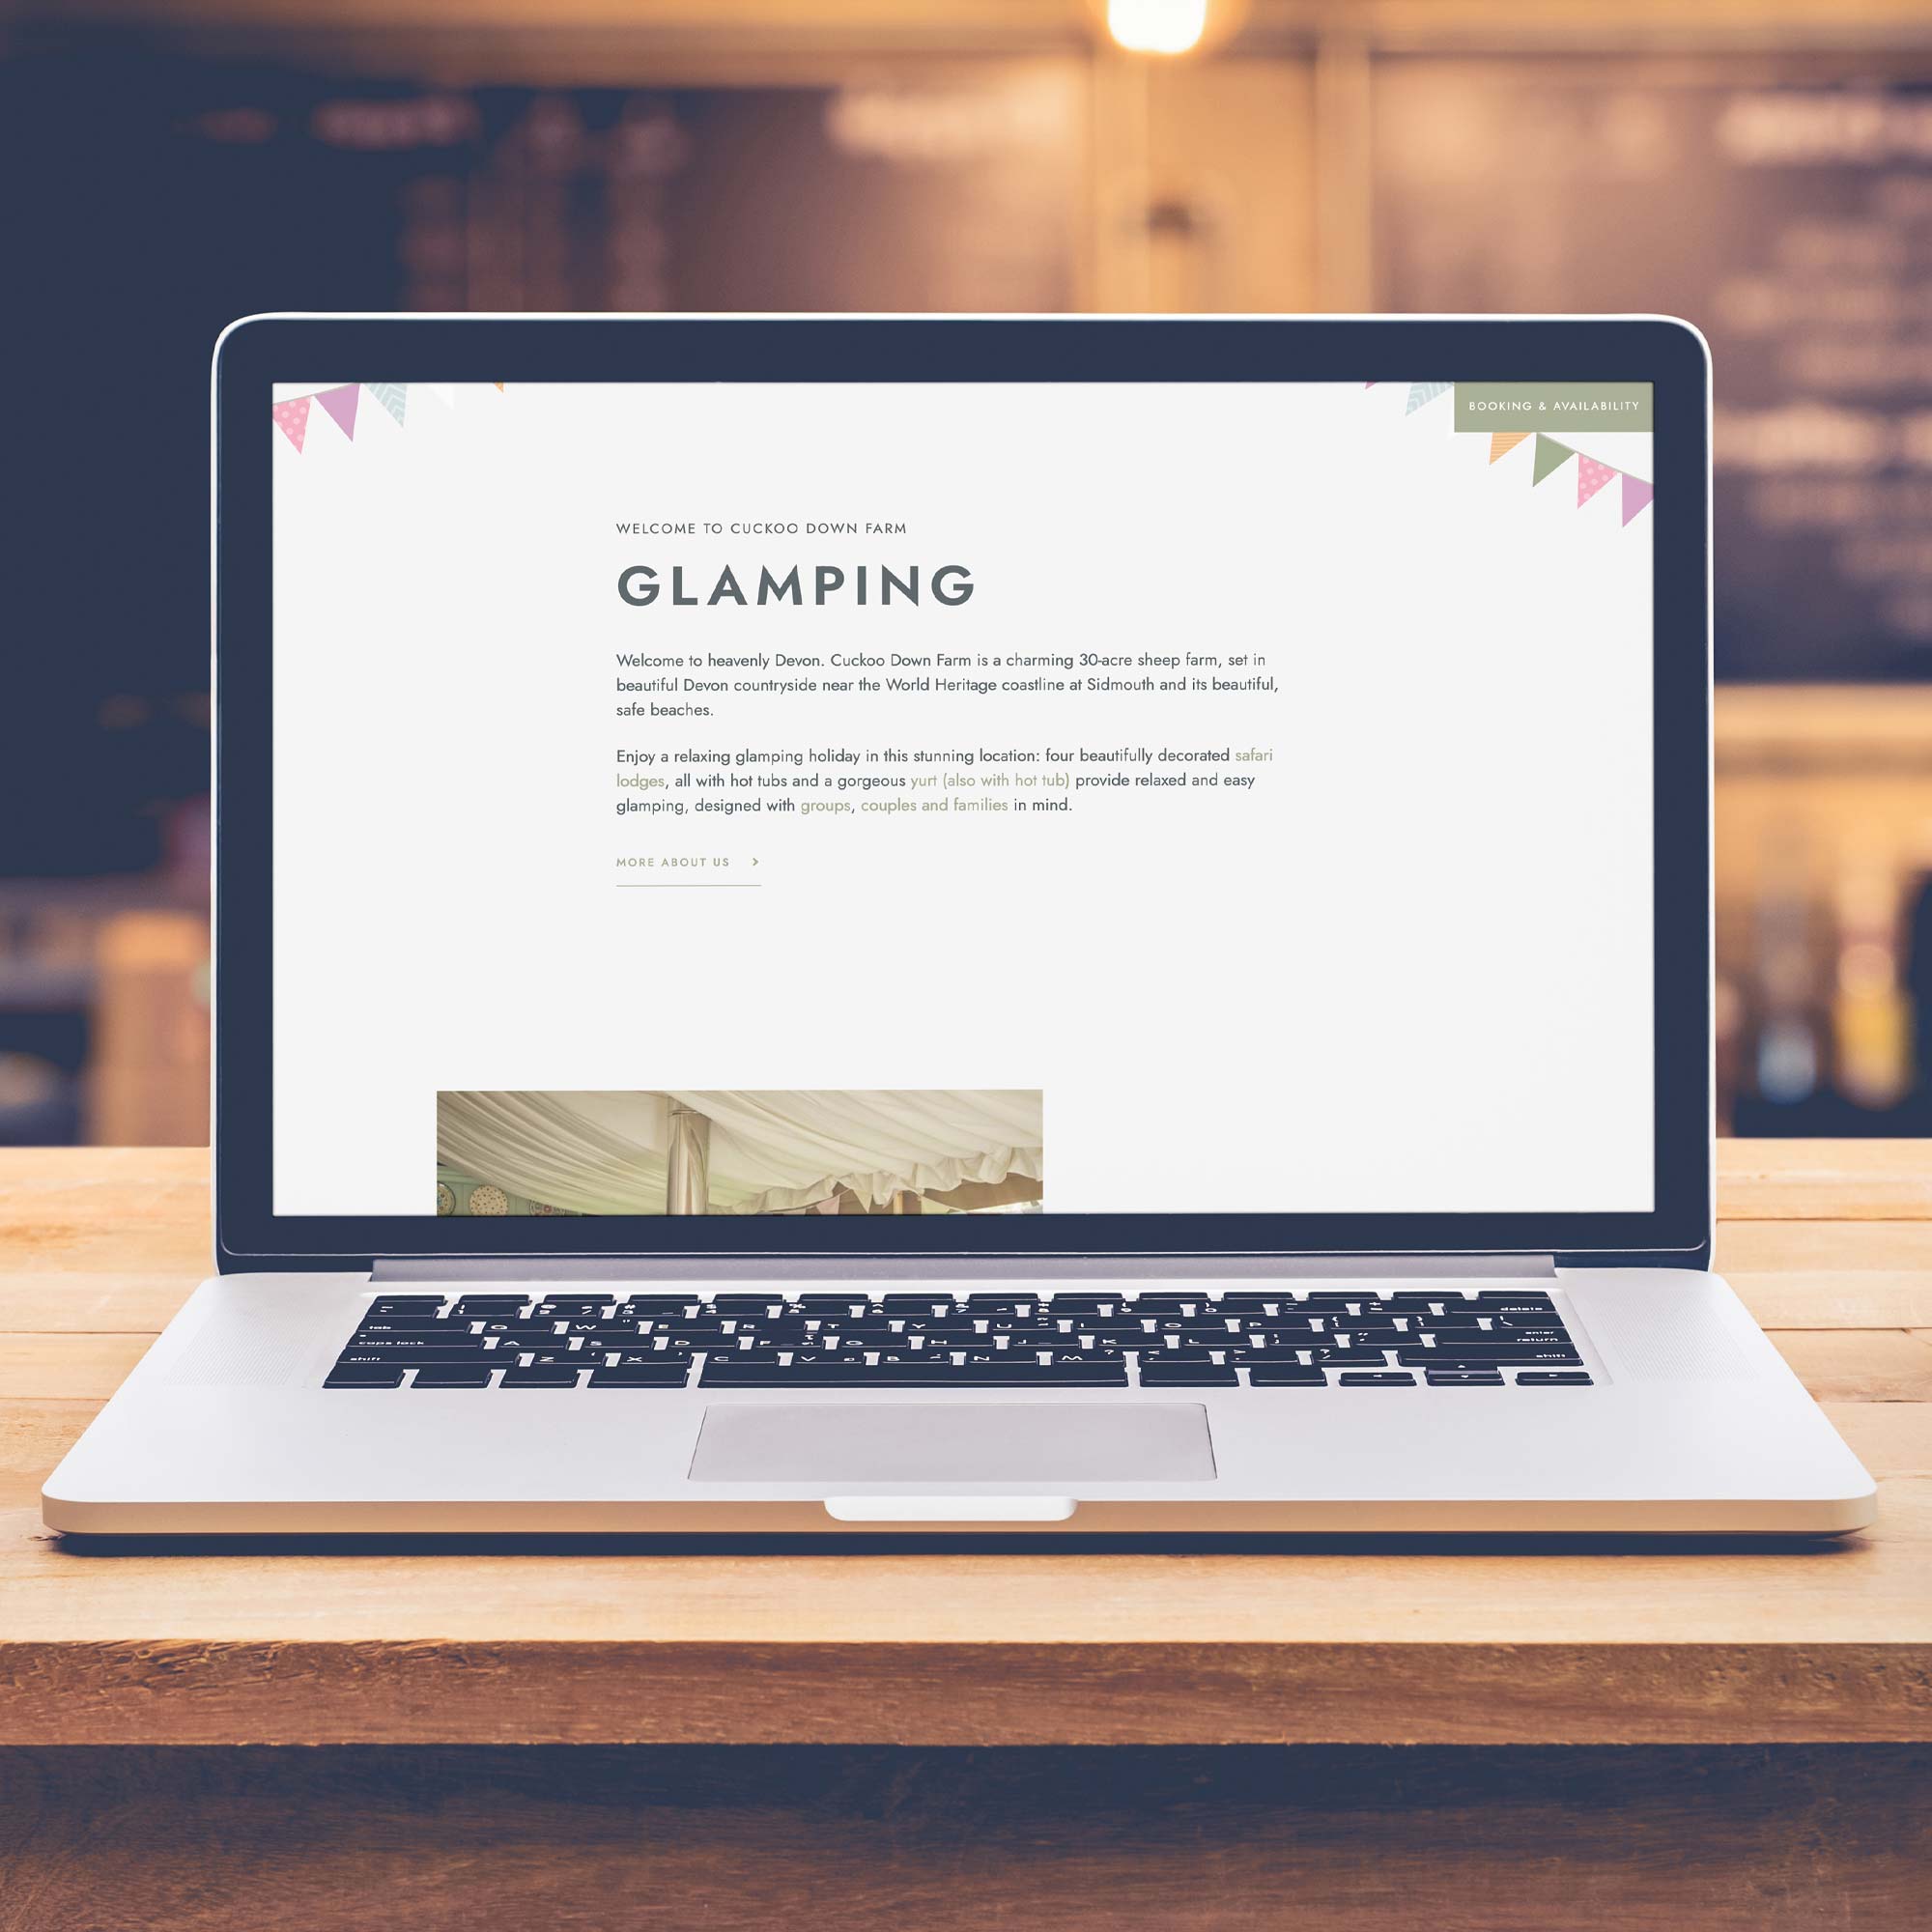 Cuckoo Down Farm Luxury Glamping Website design and development by Inventive